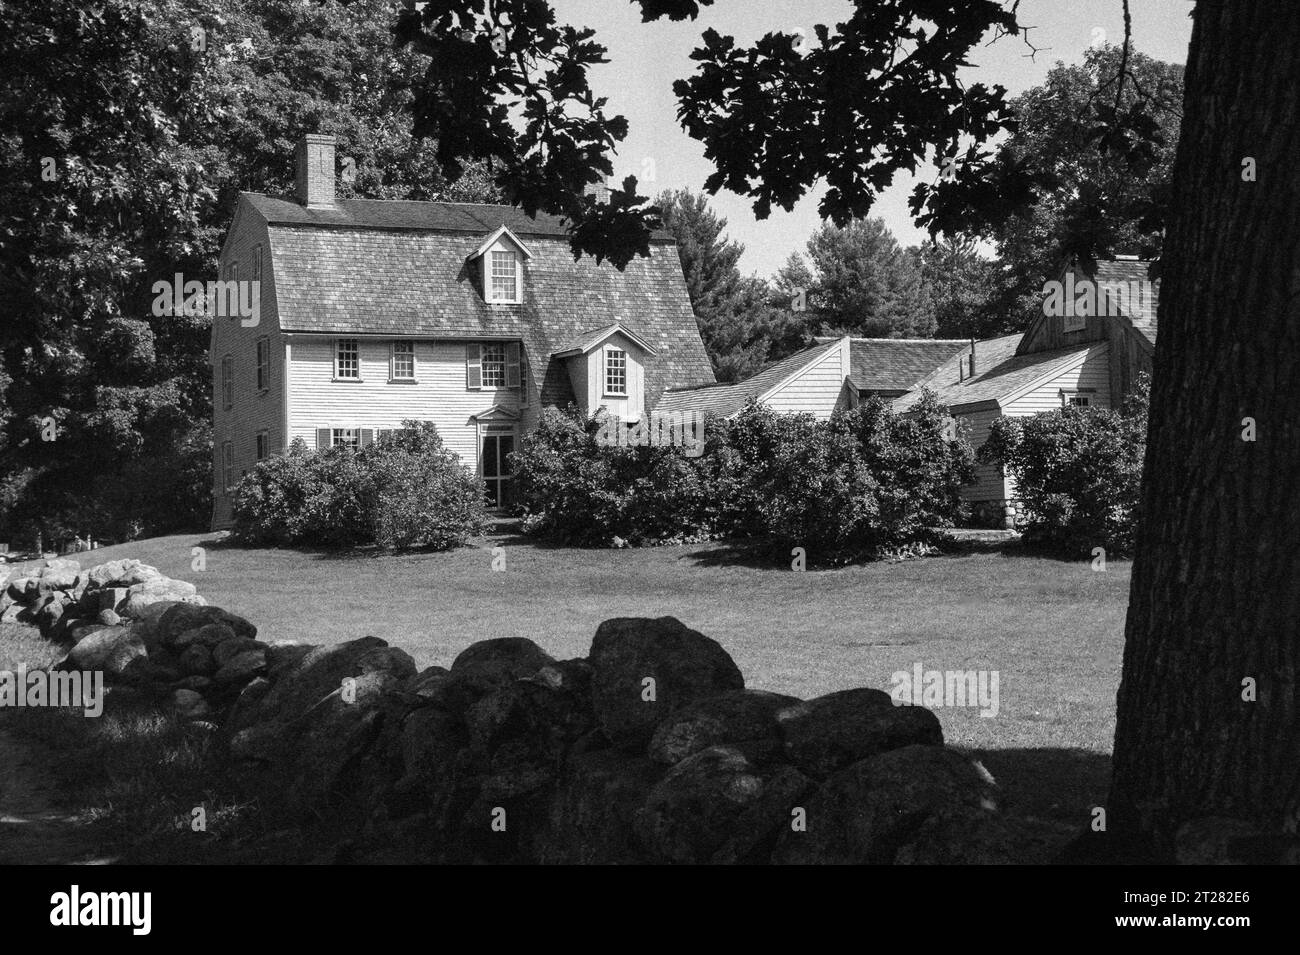 The historic Old Manse the home of Ralph Waldo Emerson and Nathaniel Hawthorne on the banks of the Concord River. The image was captured on black and Stock Photo